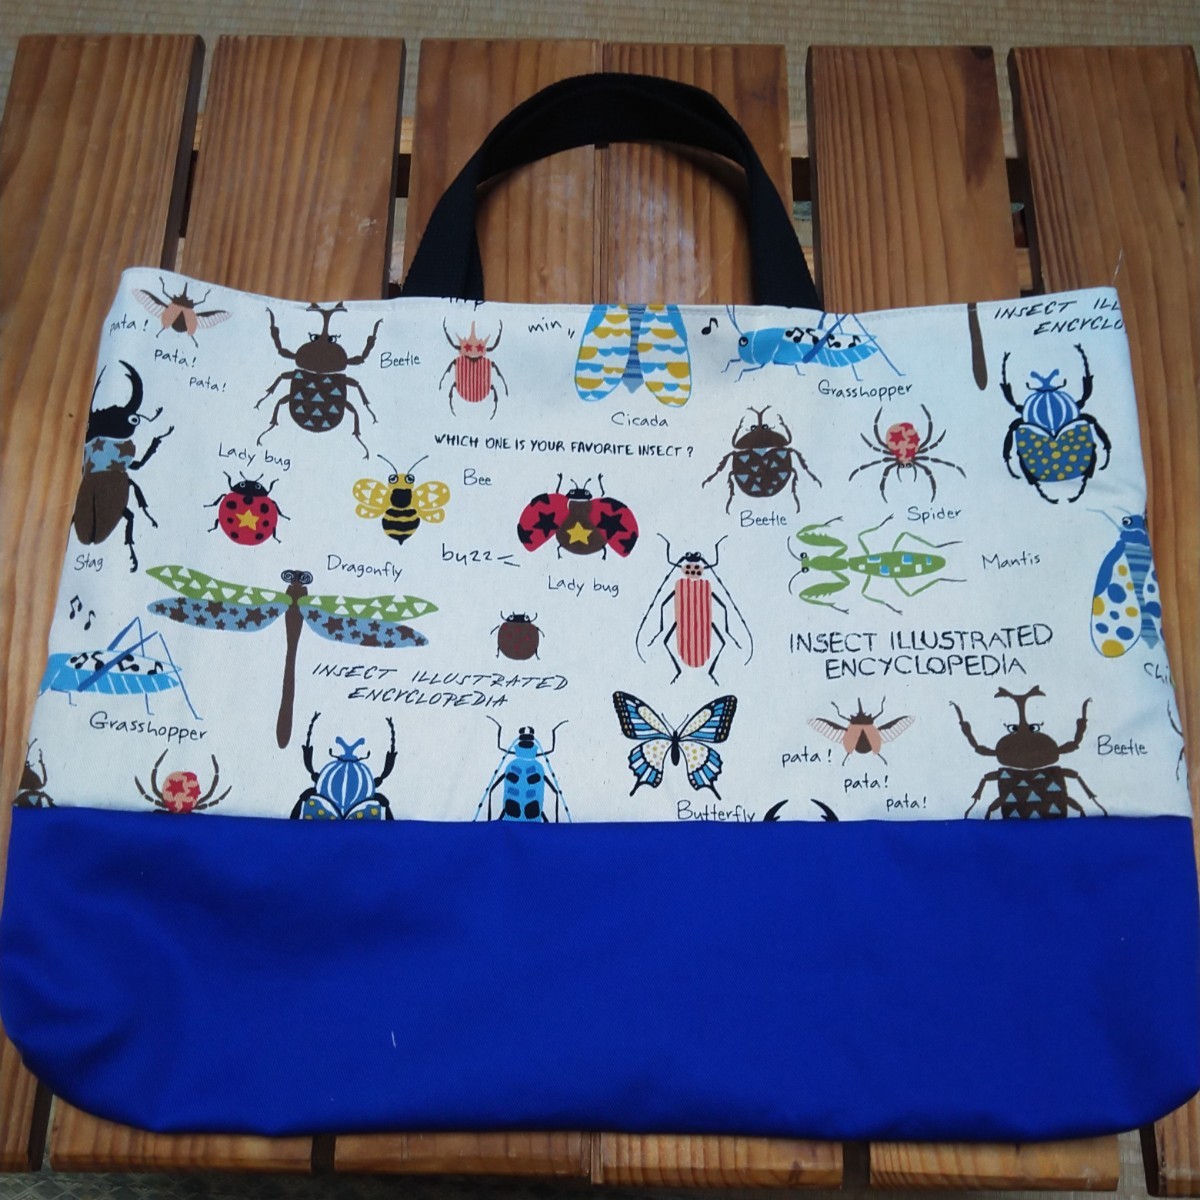  go in . go in . man insect handbag lesson back gym uniform sack indoor shoes inserting hand made gym uniform inserting pouch shoes inserting zk sack picture book sack 